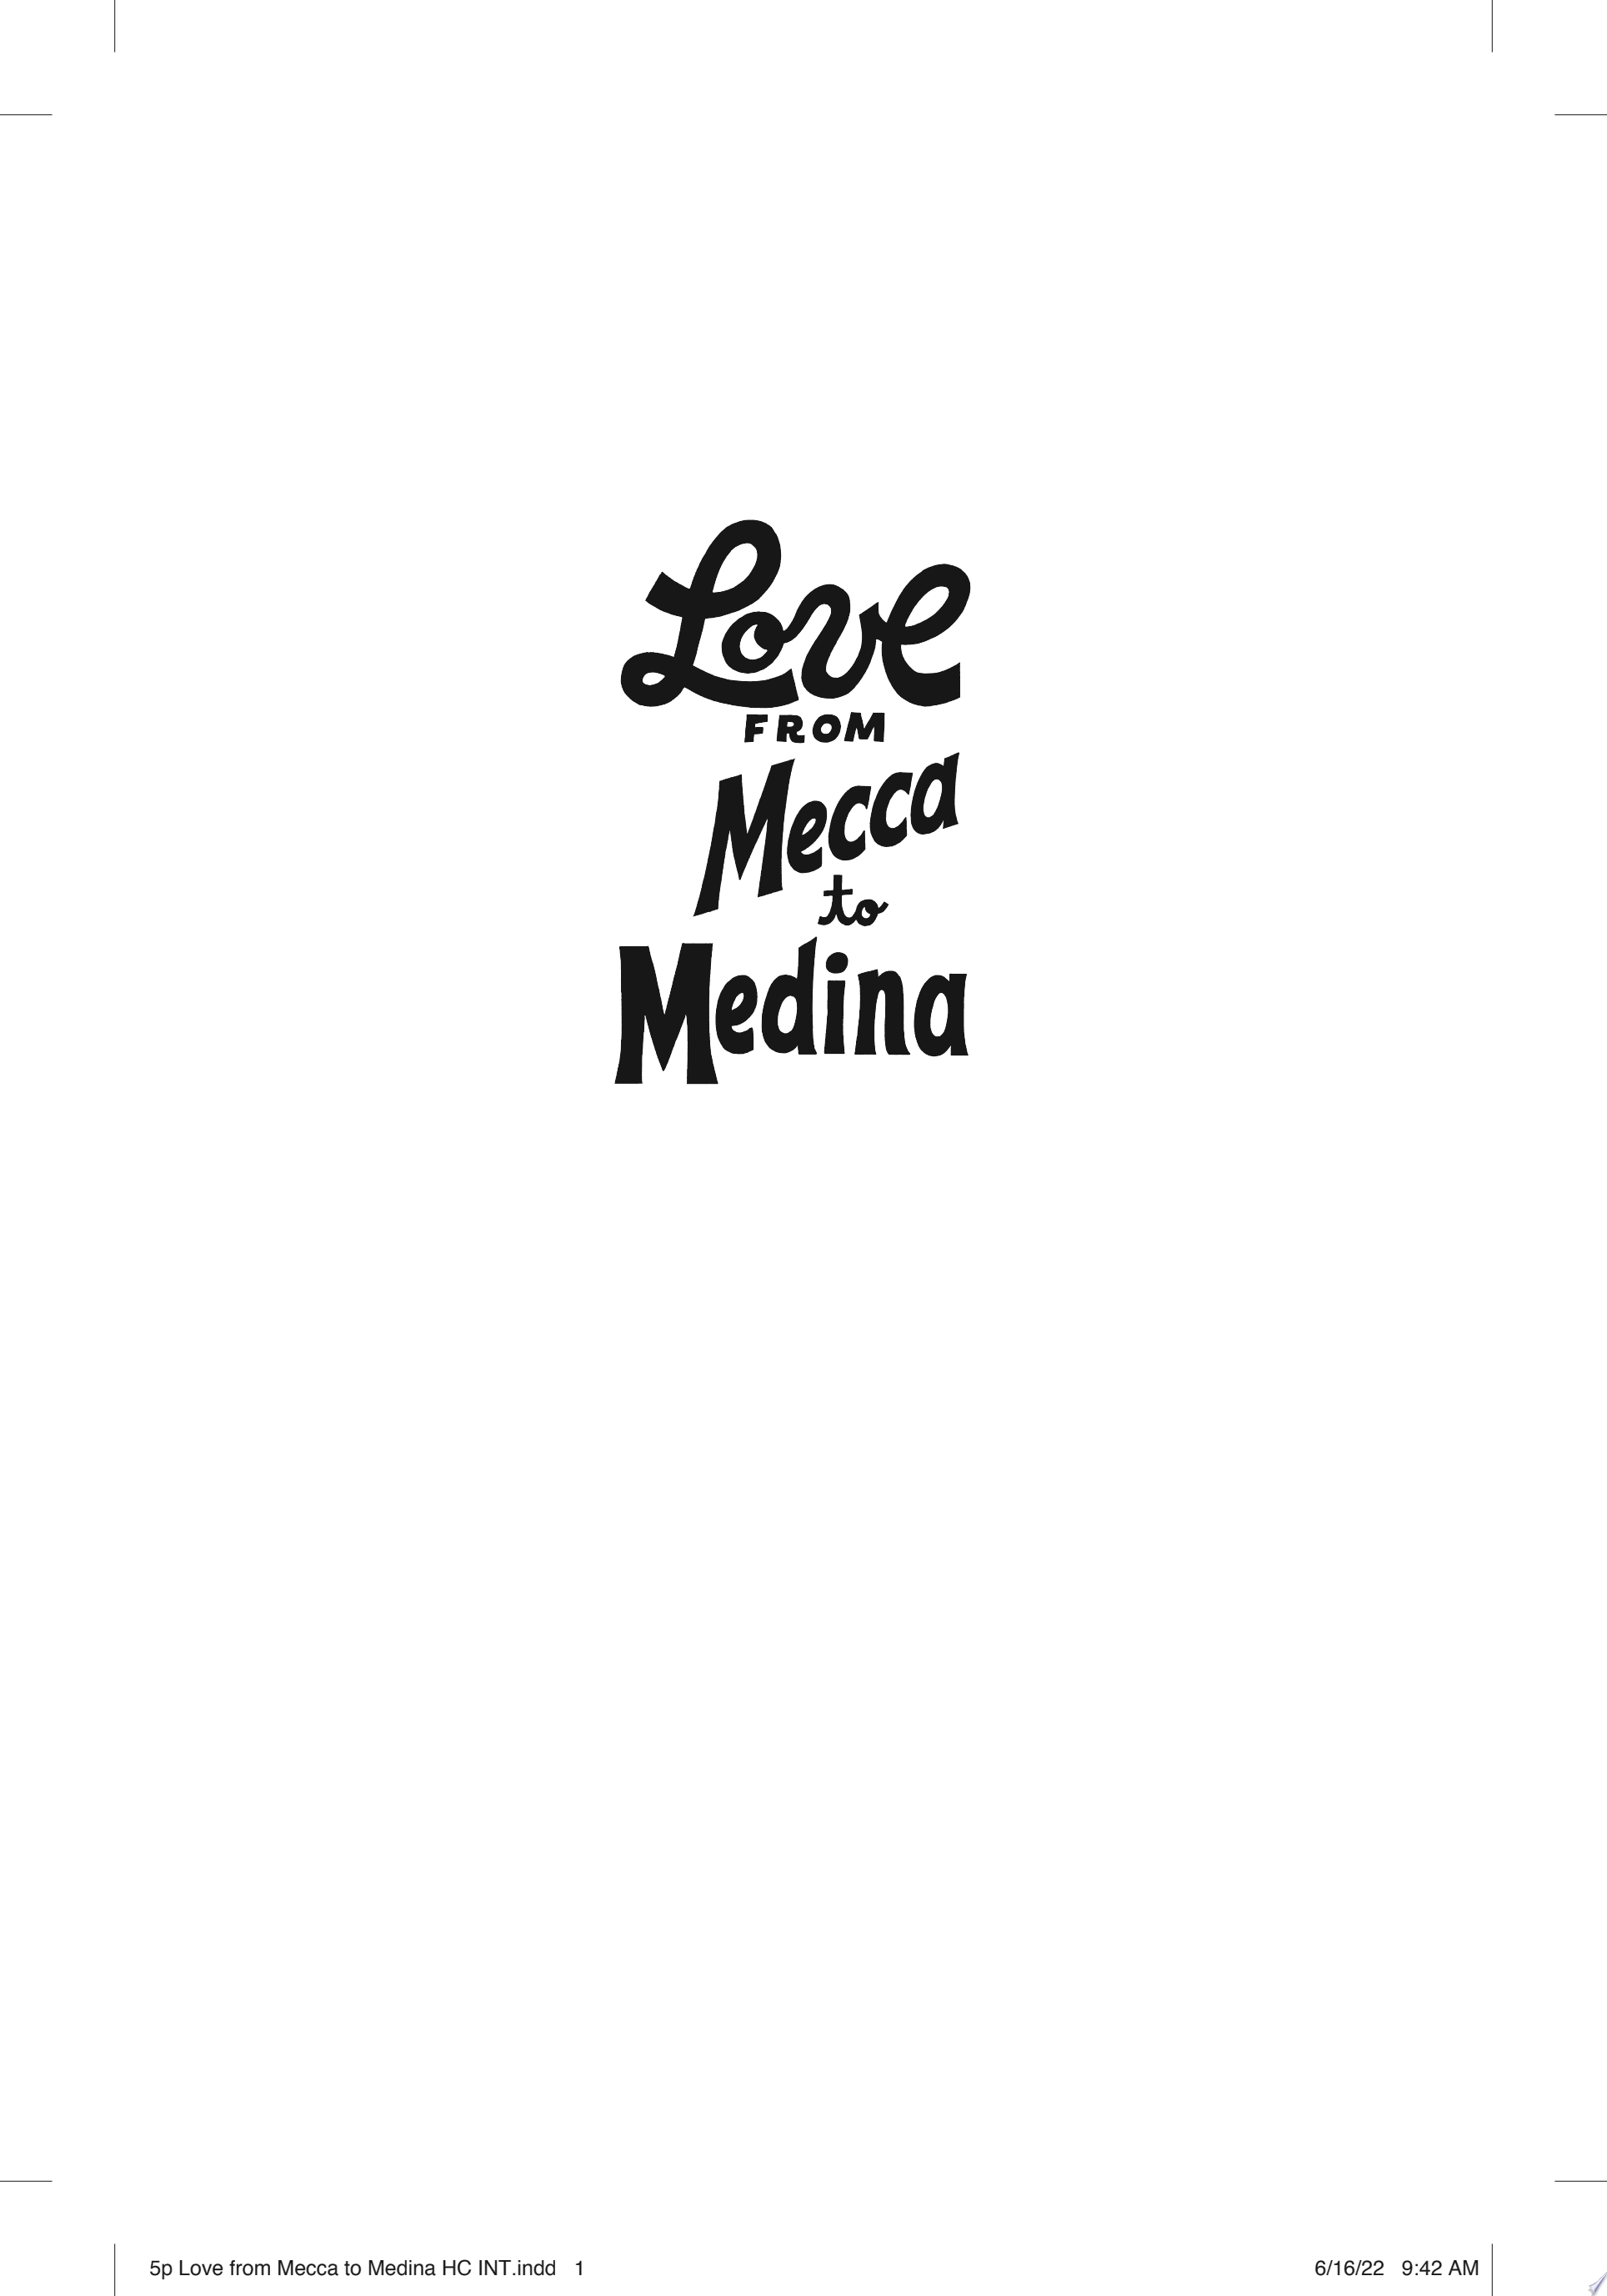 Image for "Love from Mecca to Medina"